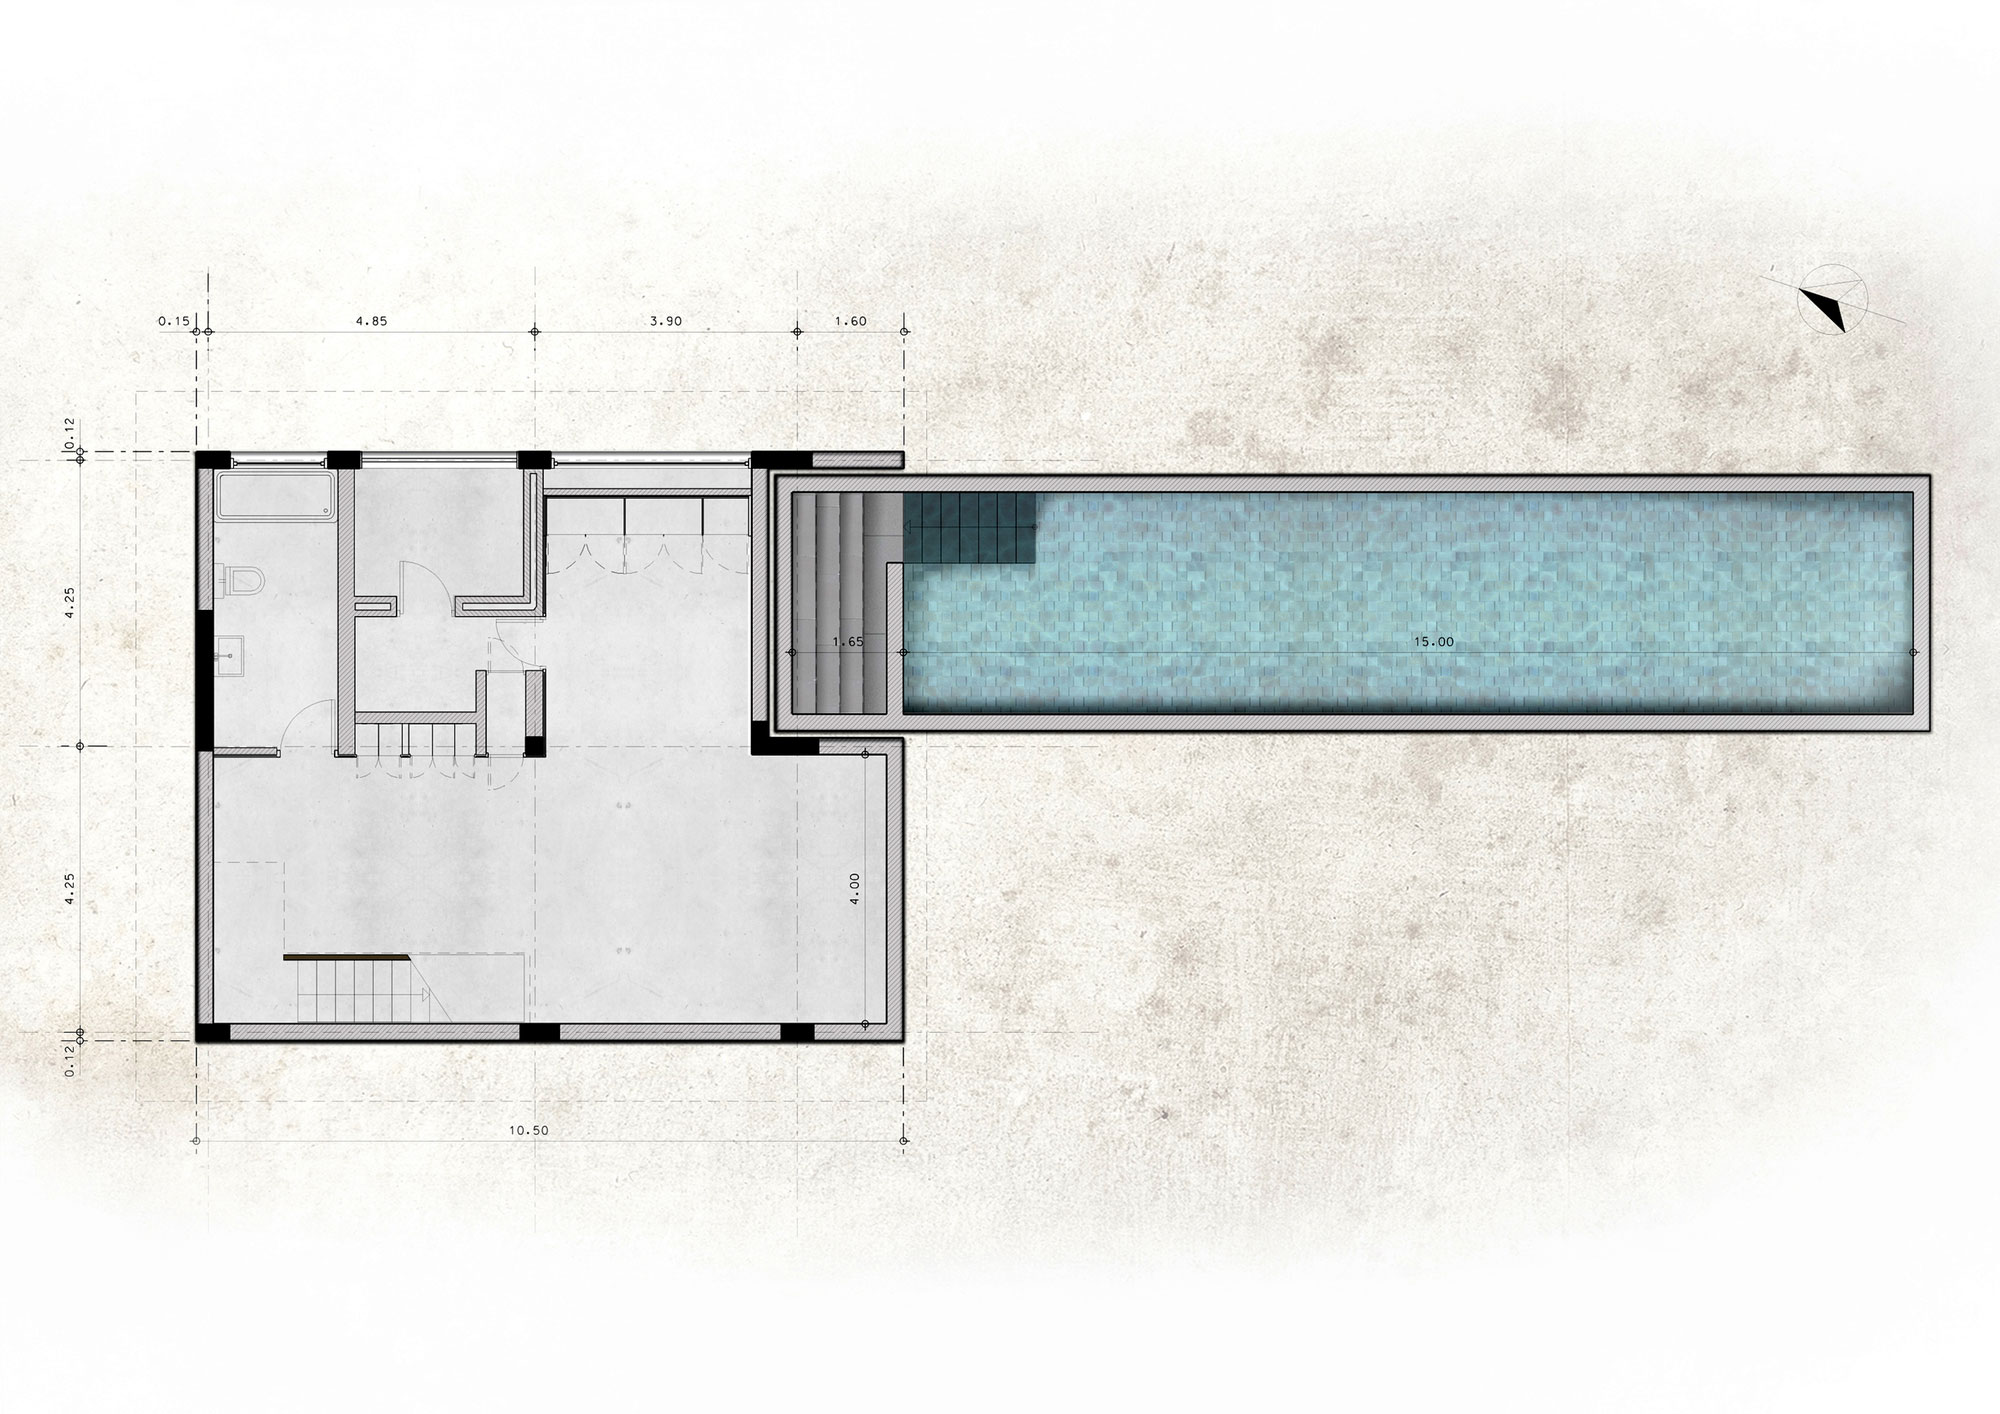 Pavilion at Architect’s Residence in Nicosia by Kythreotis Architects-16